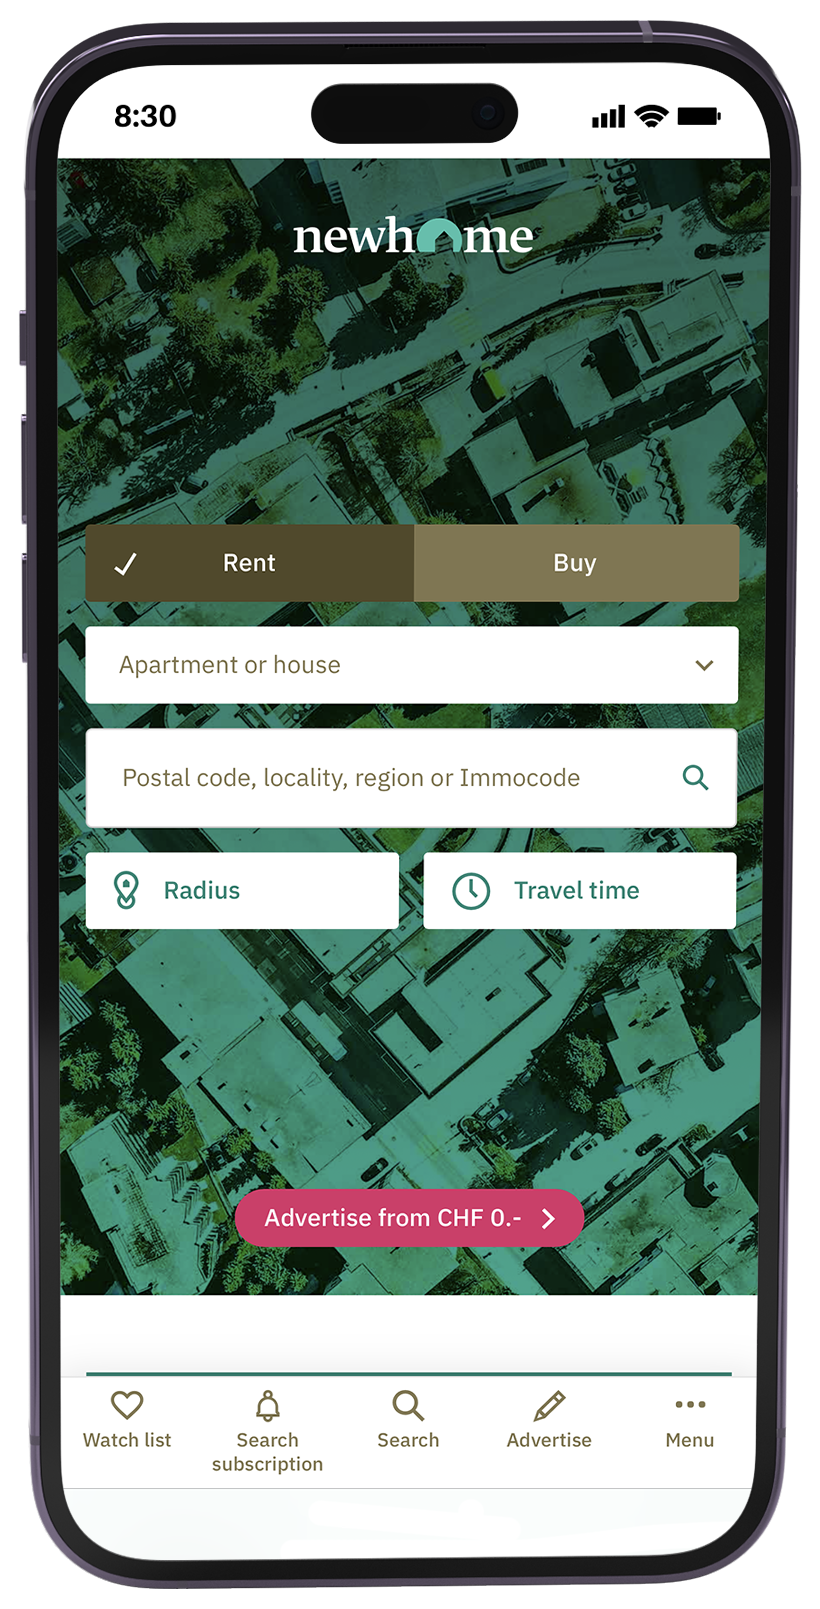 Newhome App